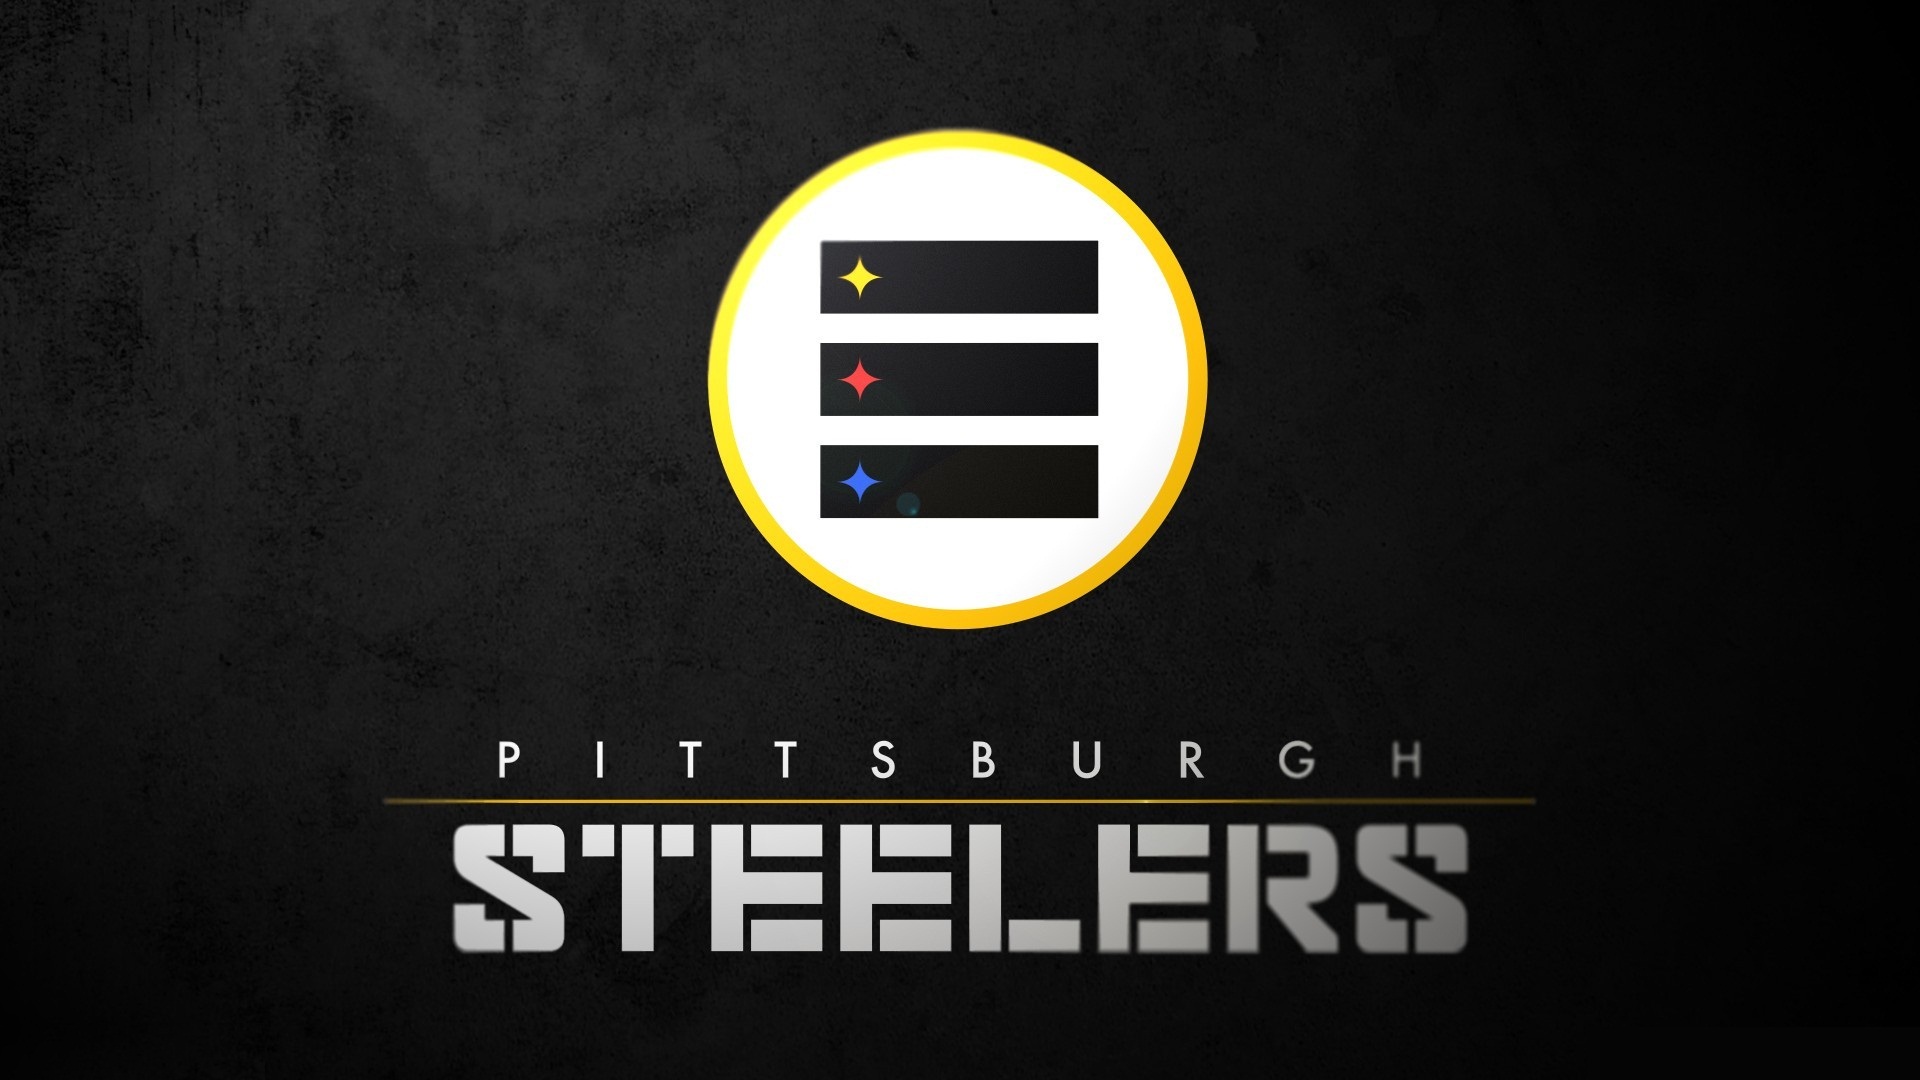 Pittsburgh Steelers For PC Wallpaper with resolution x pixel. You can make this wallpaper for your Mac or Windows Desktop Background, iPhone, Android or Tablet and another Smartphone device